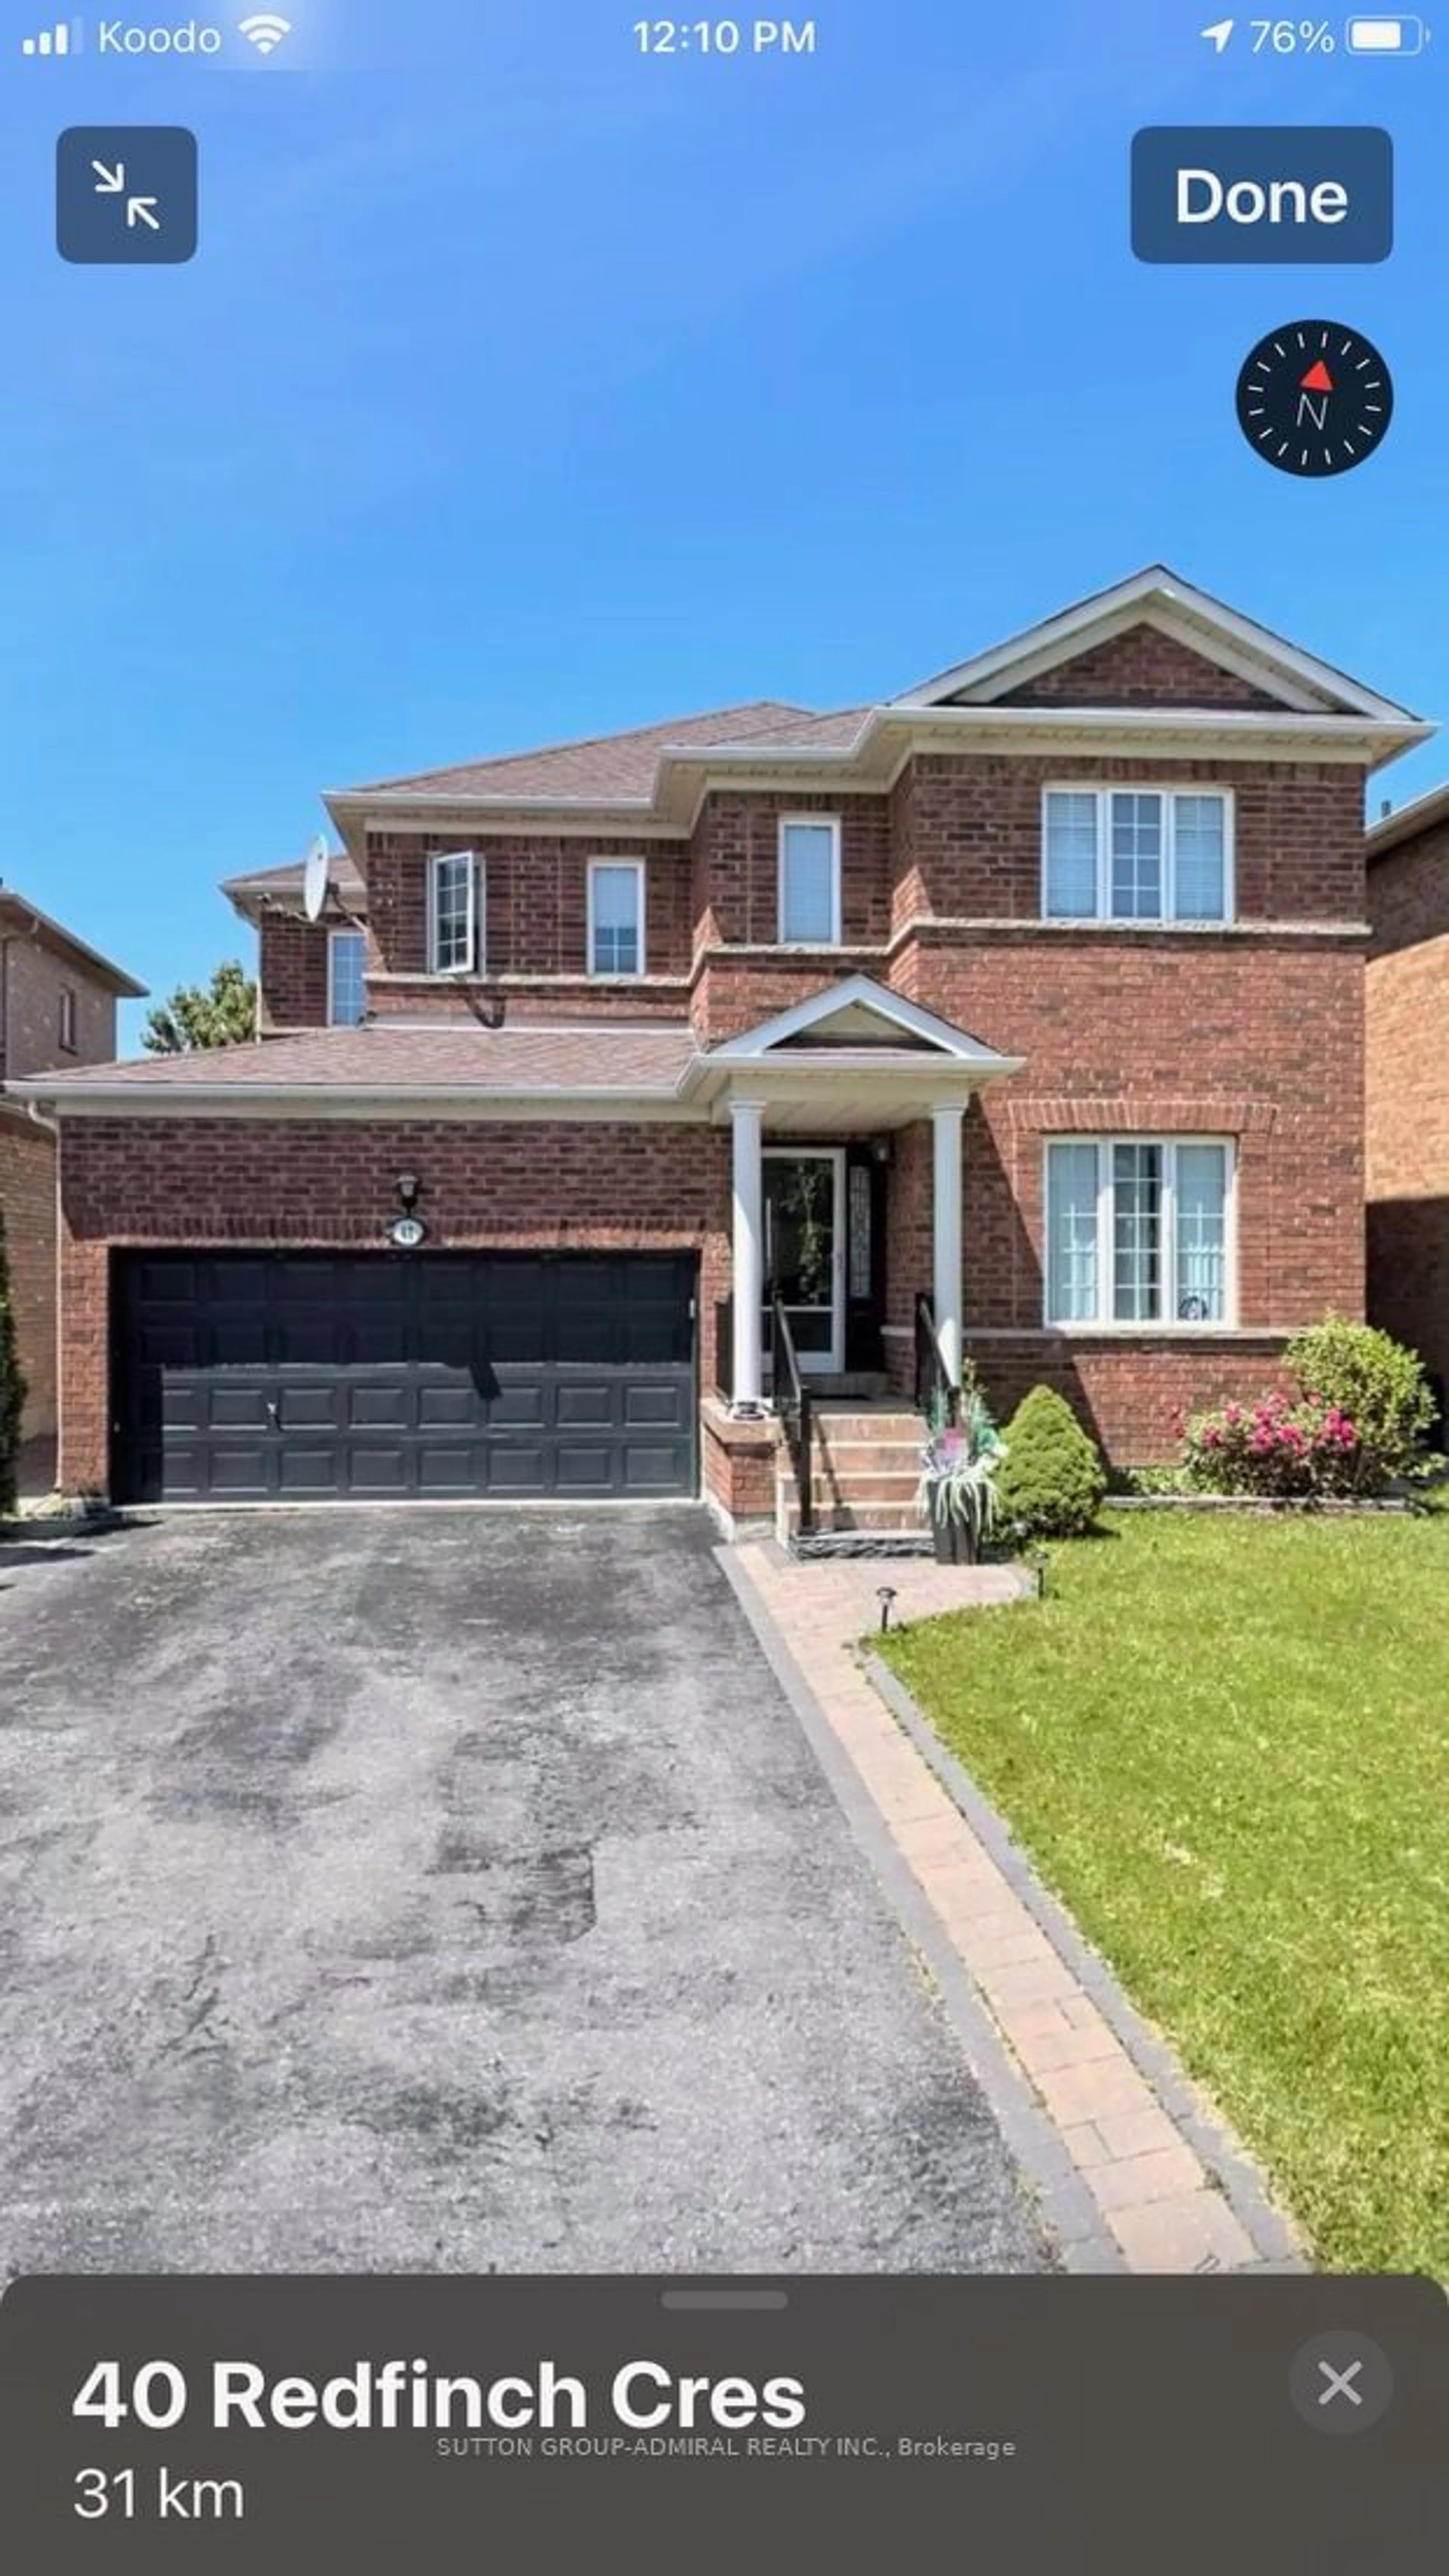 Home with brick exterior material for 40 Redfinch Cres, Vaughan Ontario L4H 2C5